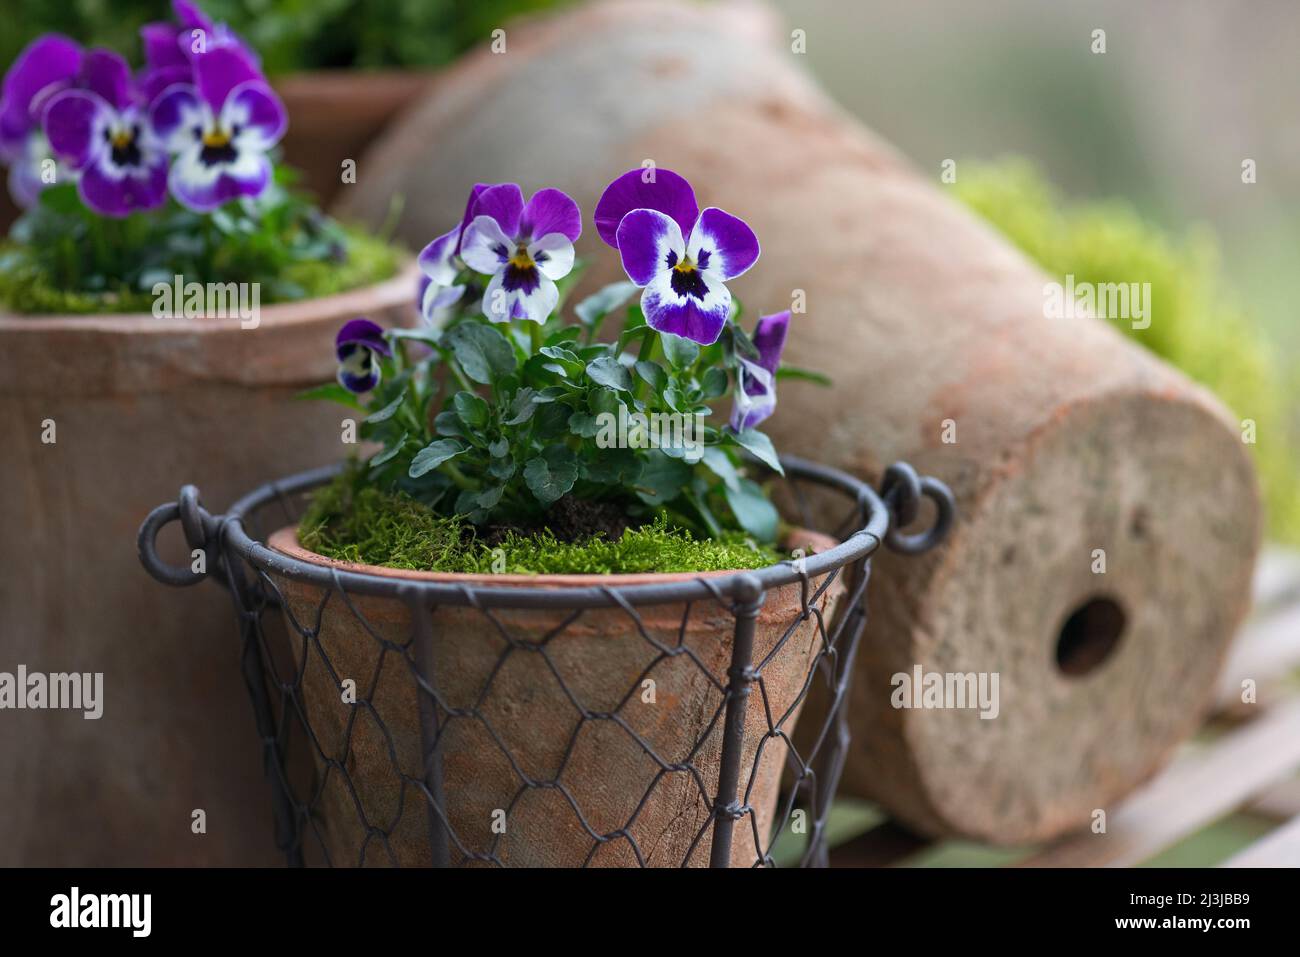 Pots with horned violets (Viola cornuta), flowers in purple and white Stock Photo